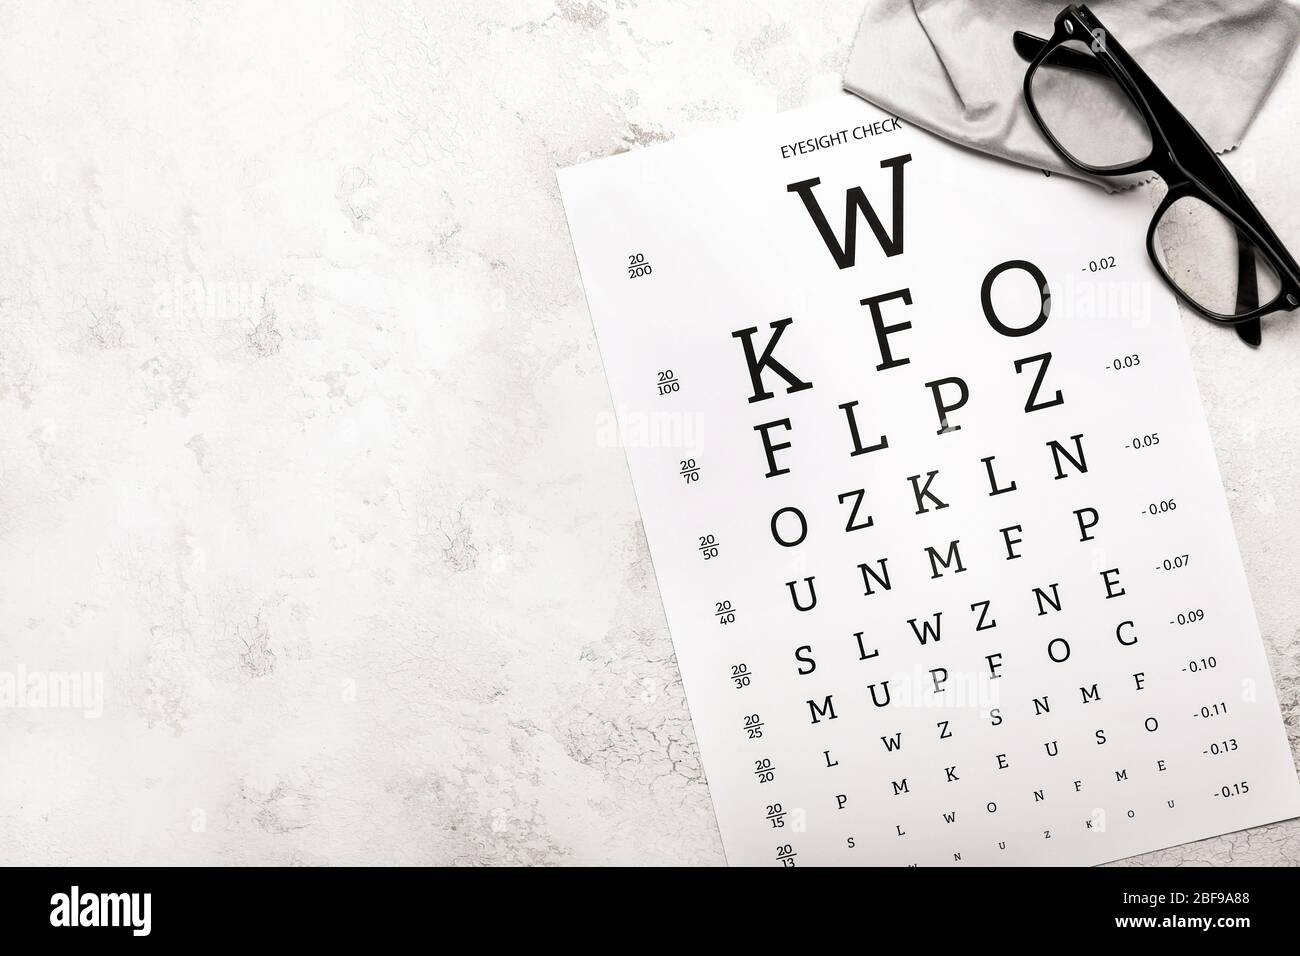 https://c8.alamy.com/comp/2BF9A88/eye-test-chart-with-eyeglasses-on-white-background-2BF9A88.jpg